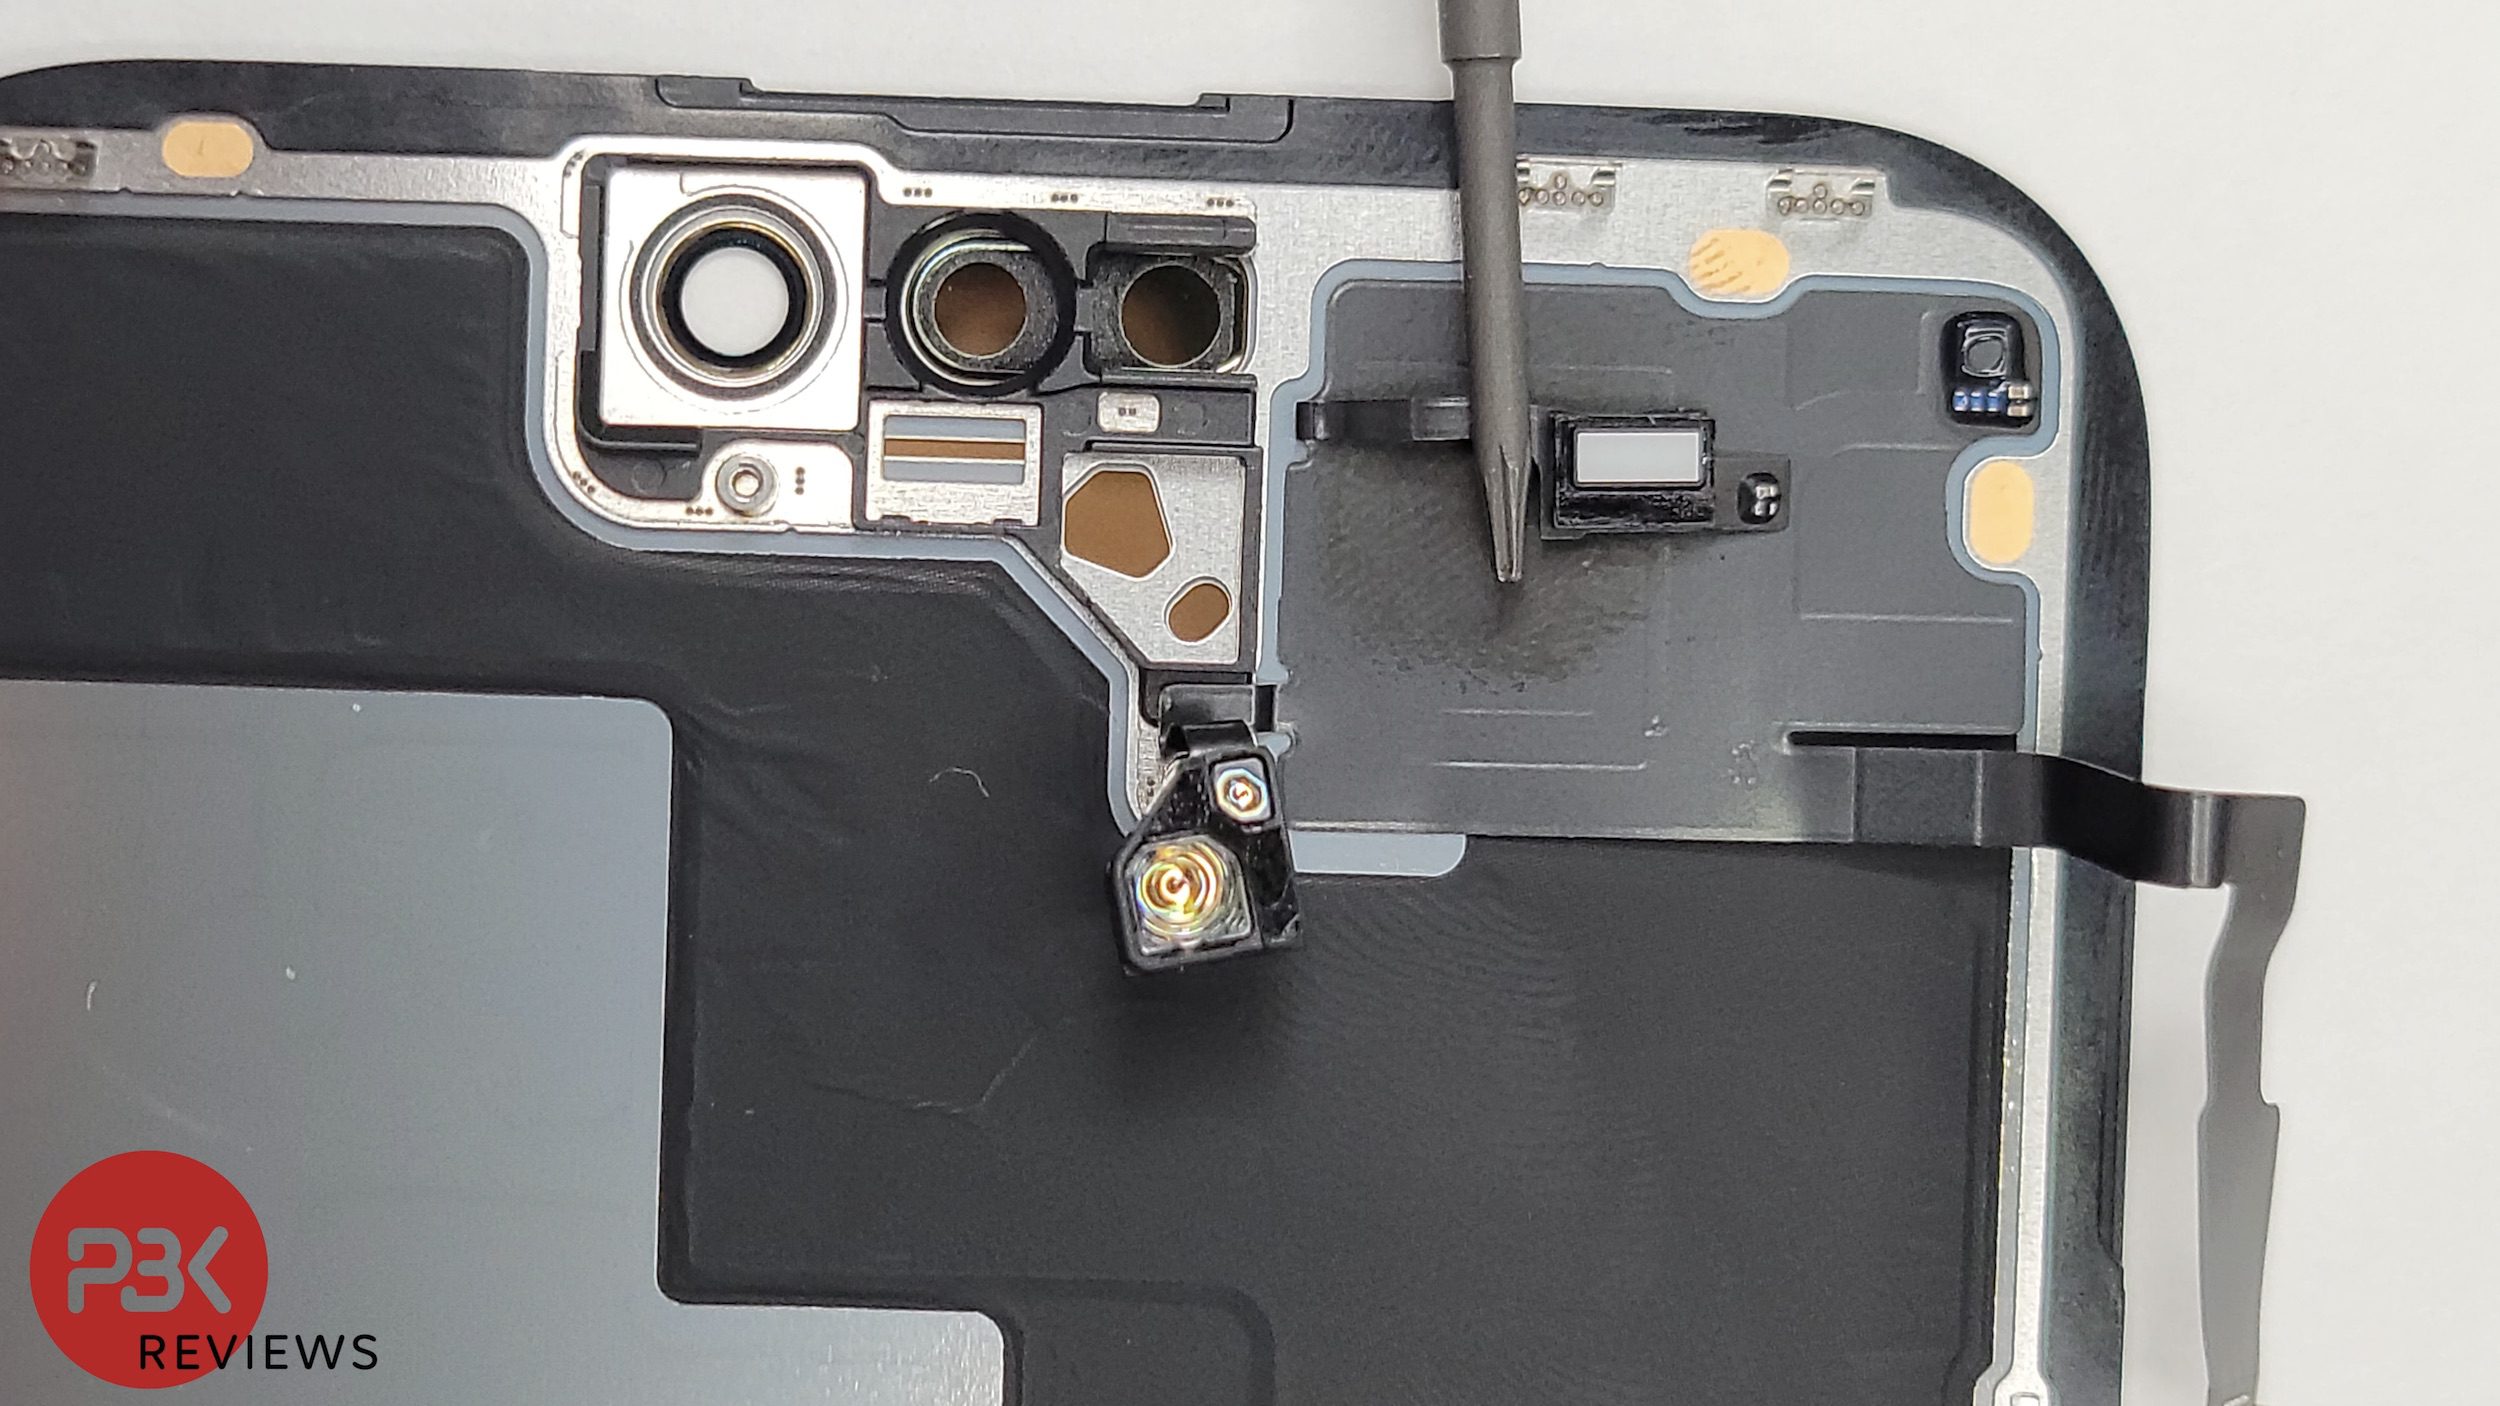 The iPhone 14 Pro Max early teardown gives us a first look at the phone's internal components.